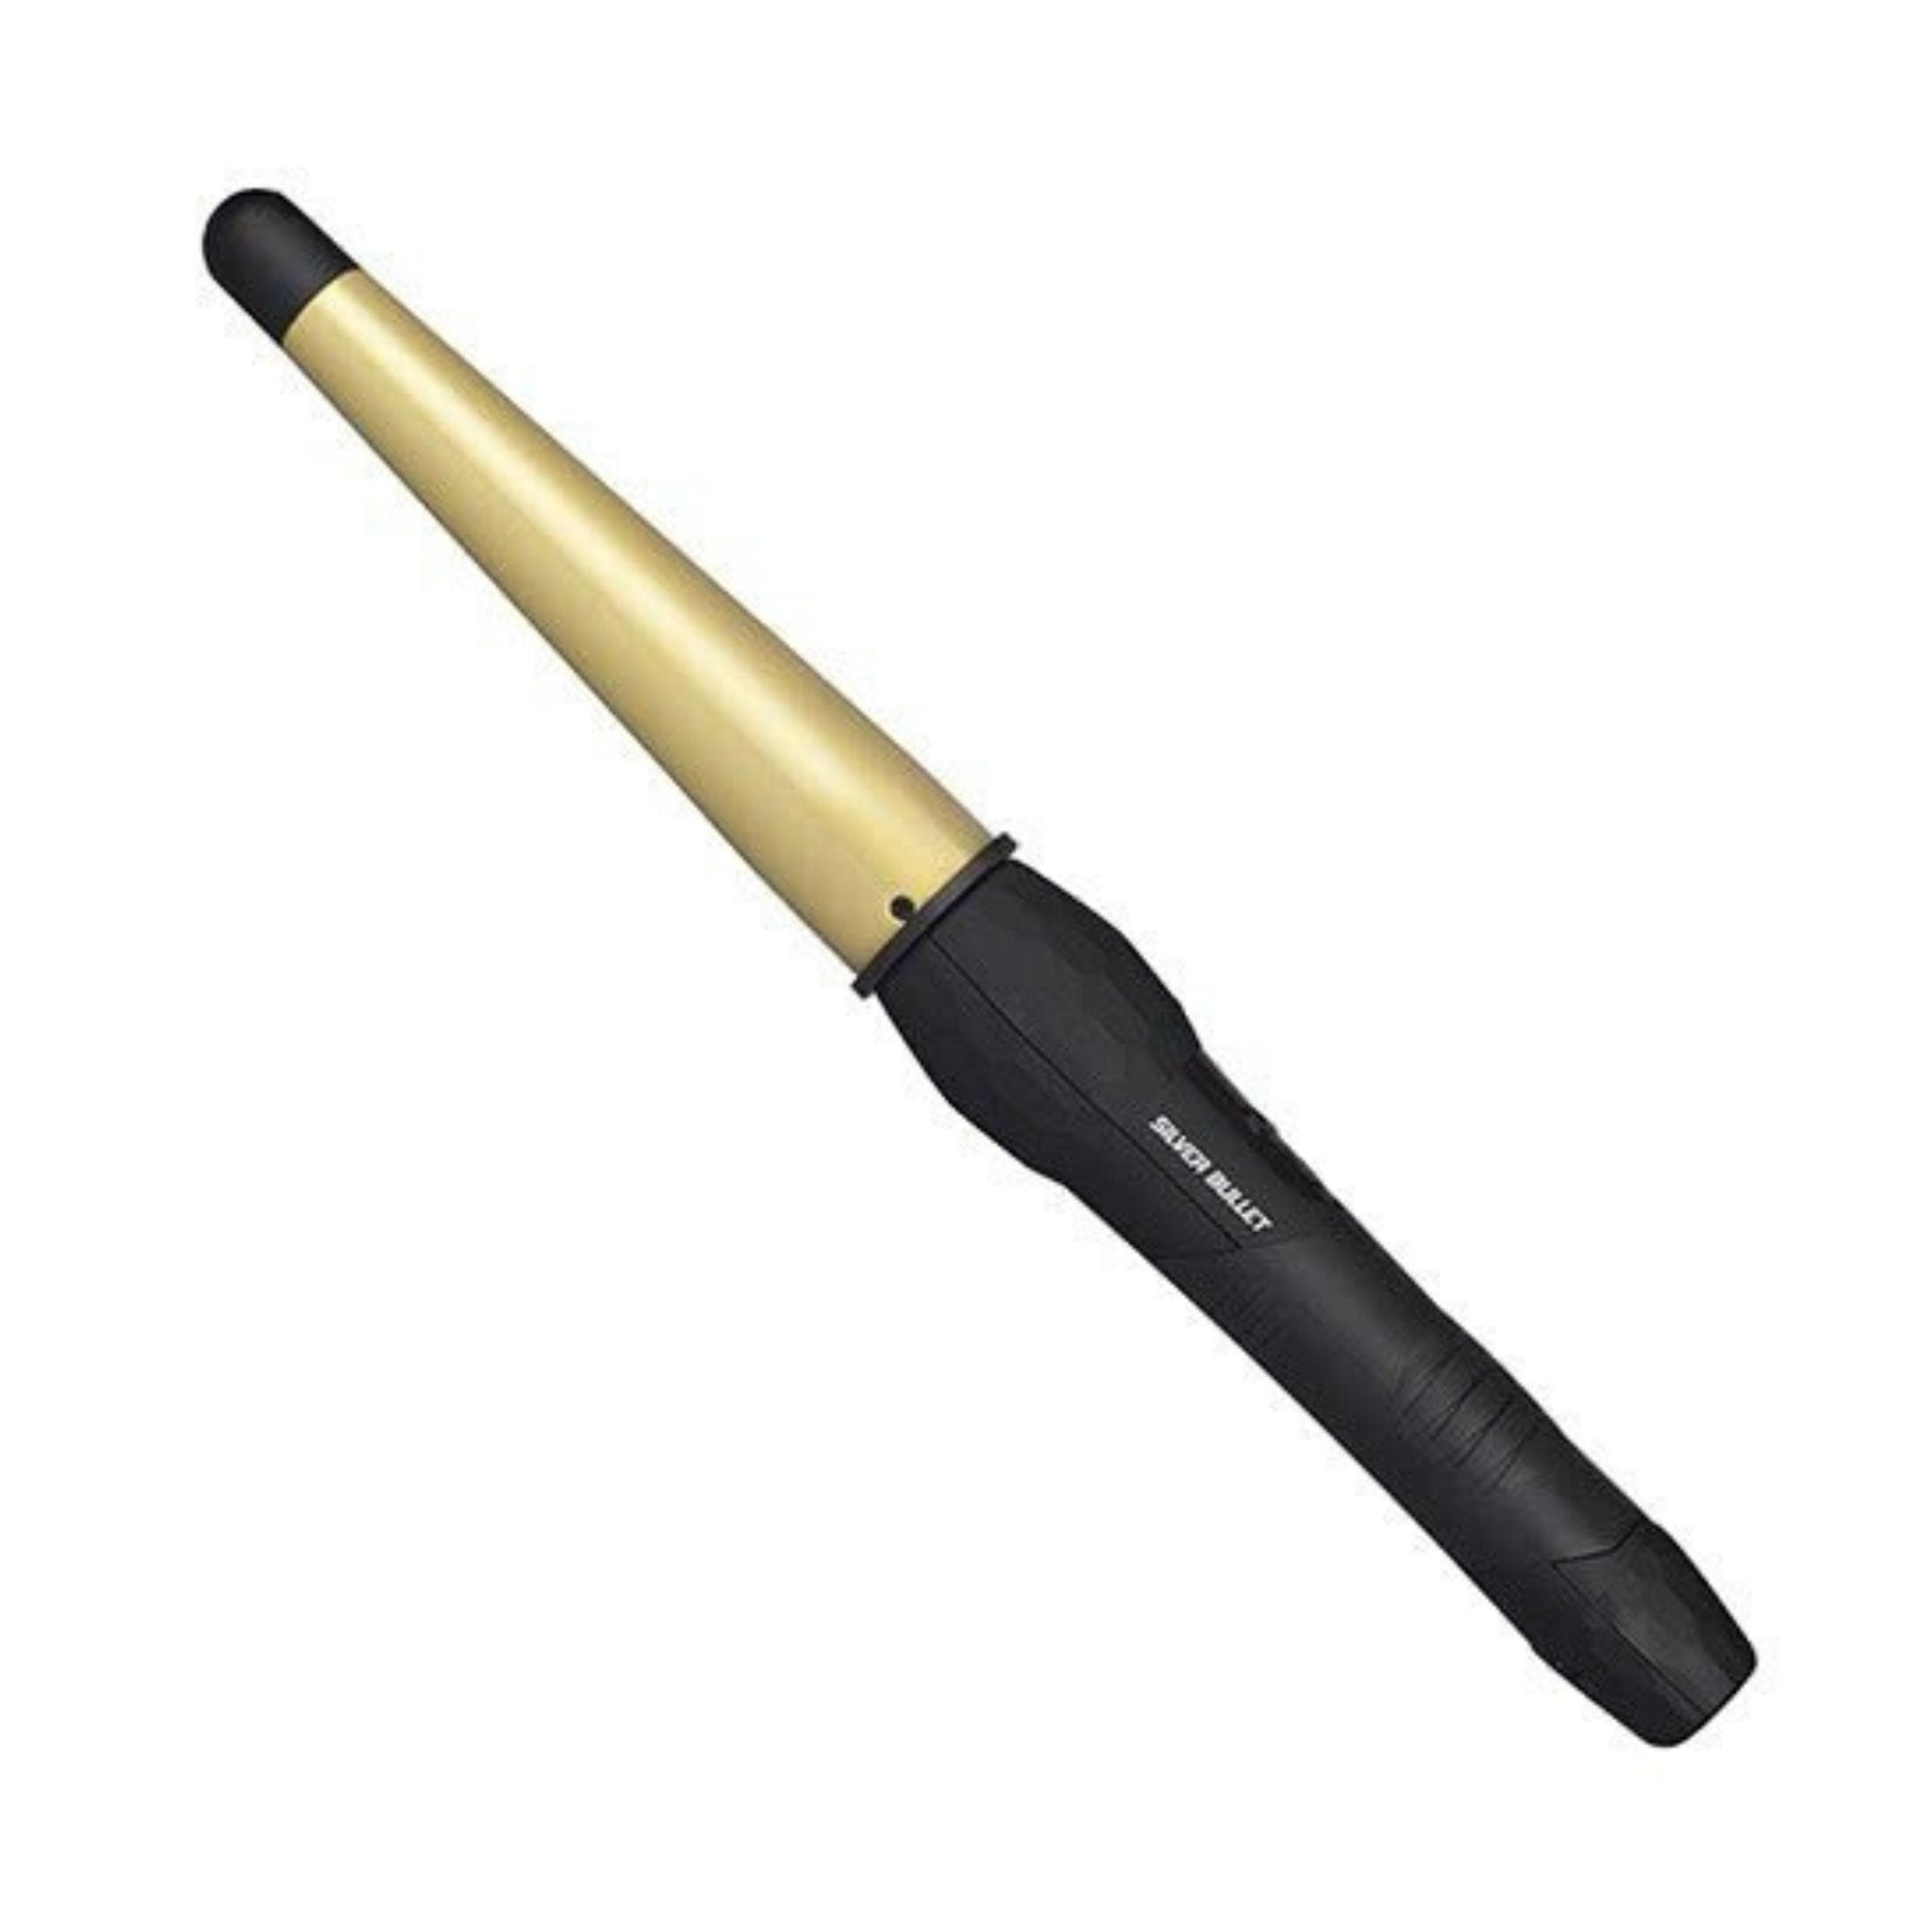 Silver Bullet Fastlane Large Ceramic Conical Curling Iron Gold:19mm-32mm - HairBeautyInk